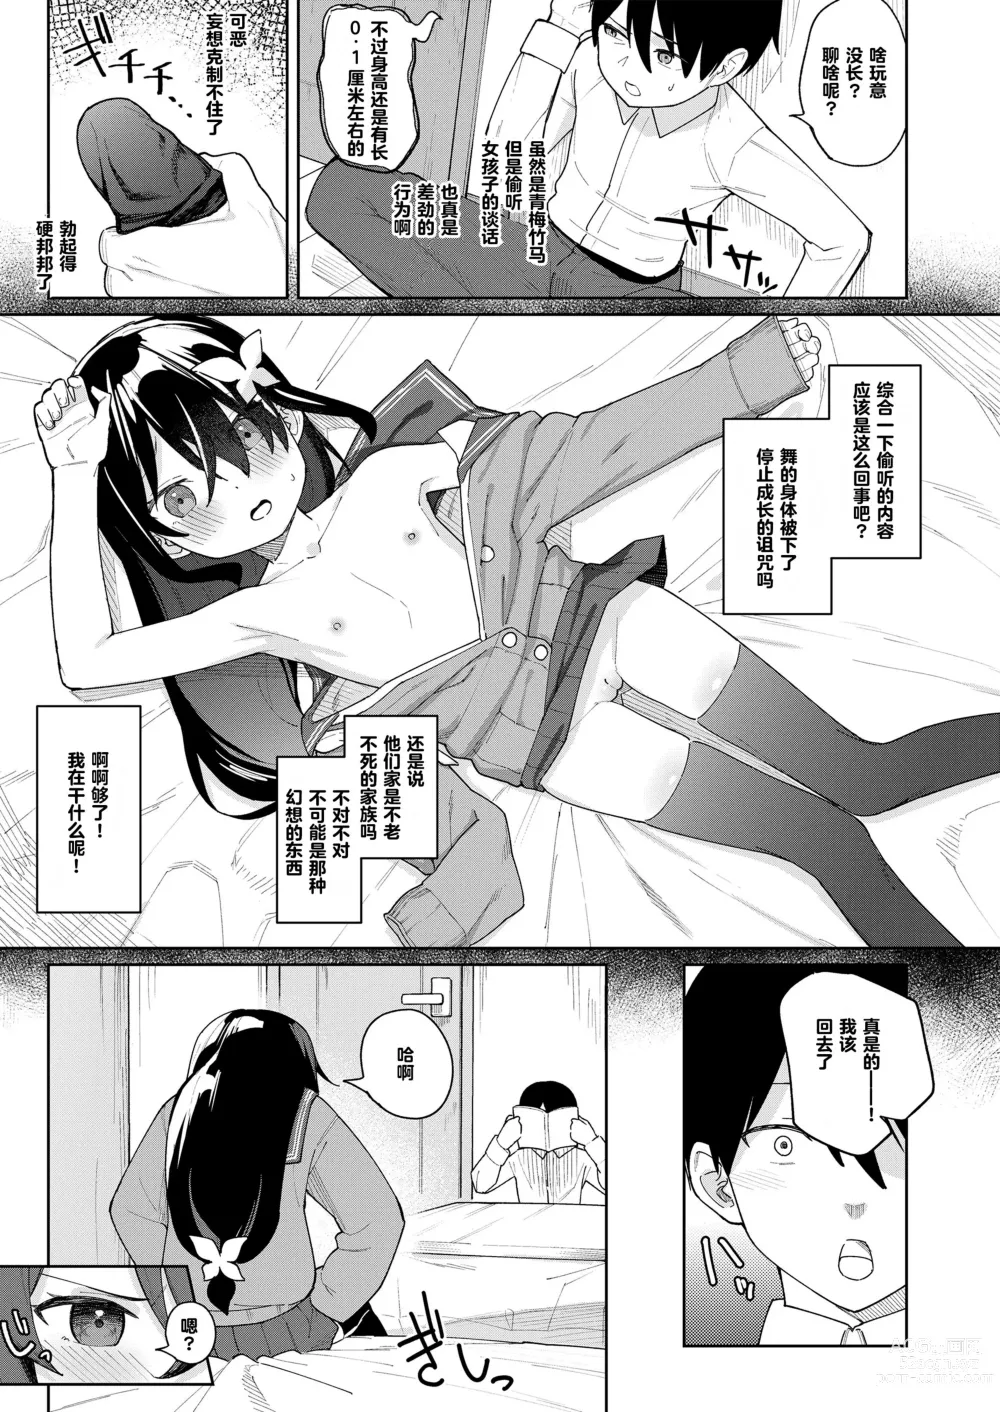 Page 4 of doujinshi My childhood friend is small